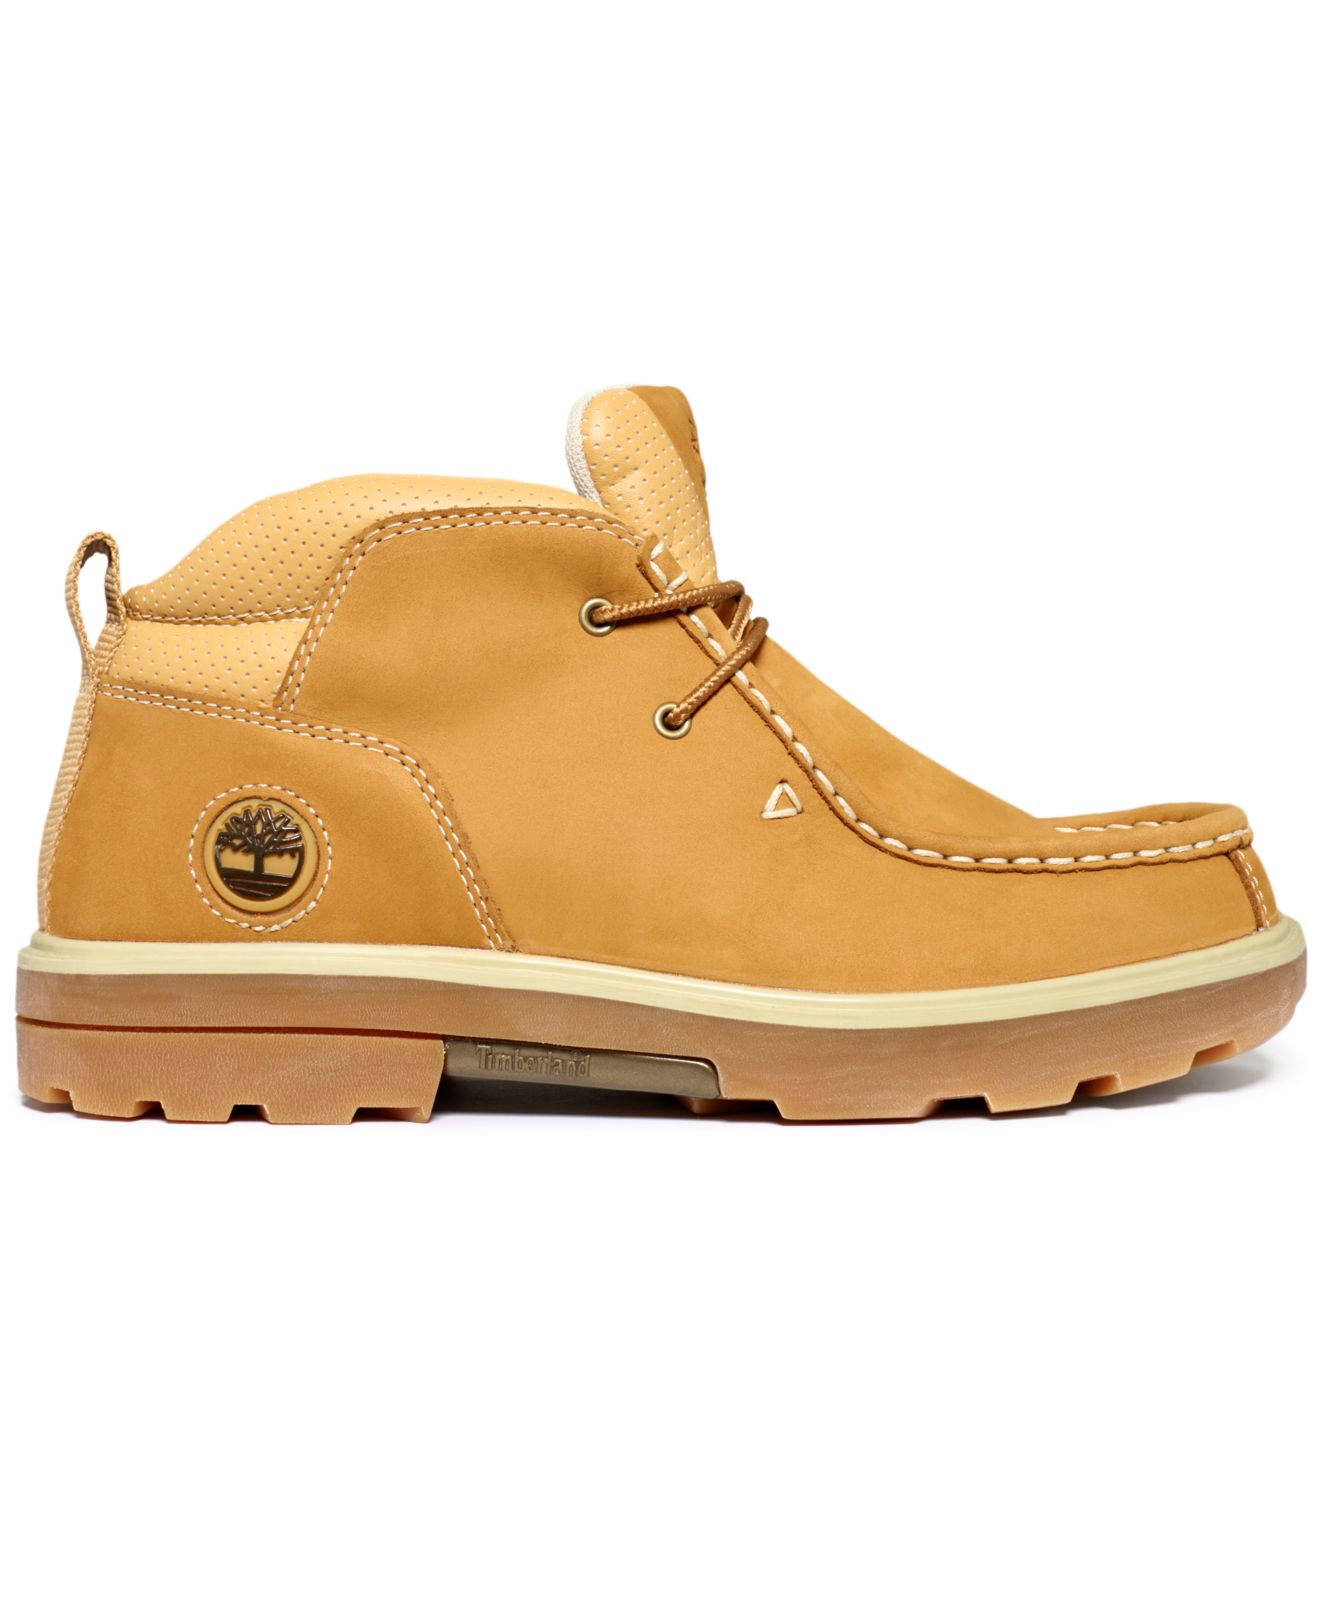 Buy > timberland boots rugged > in stock